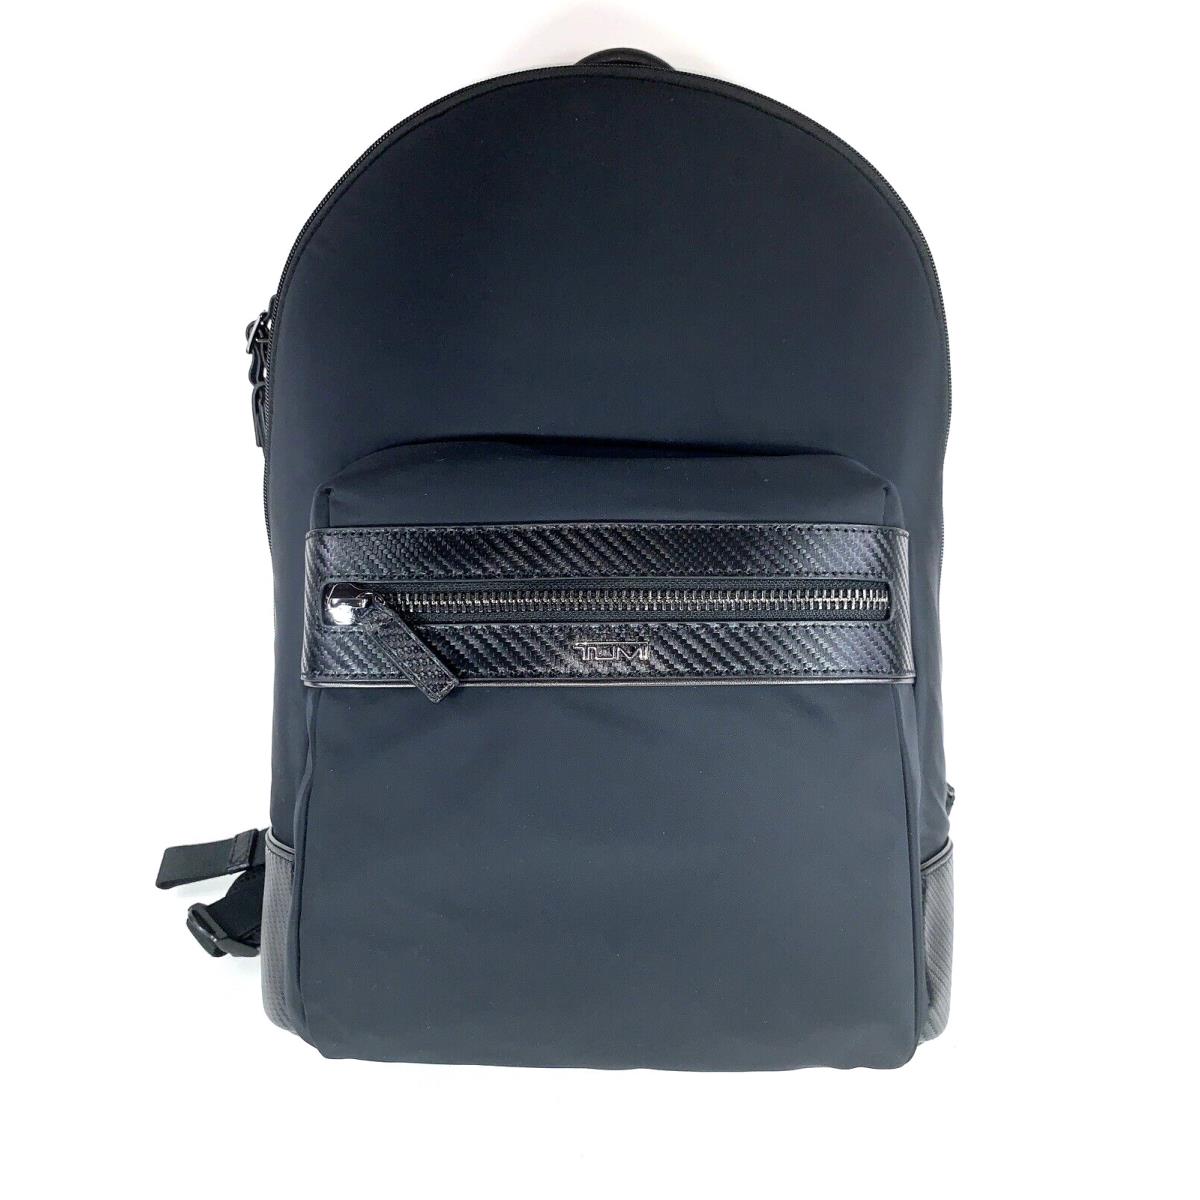 Tumi Spencer Campus Black Backpack Size 16X12X5 144989-1052 14X10 Laptop